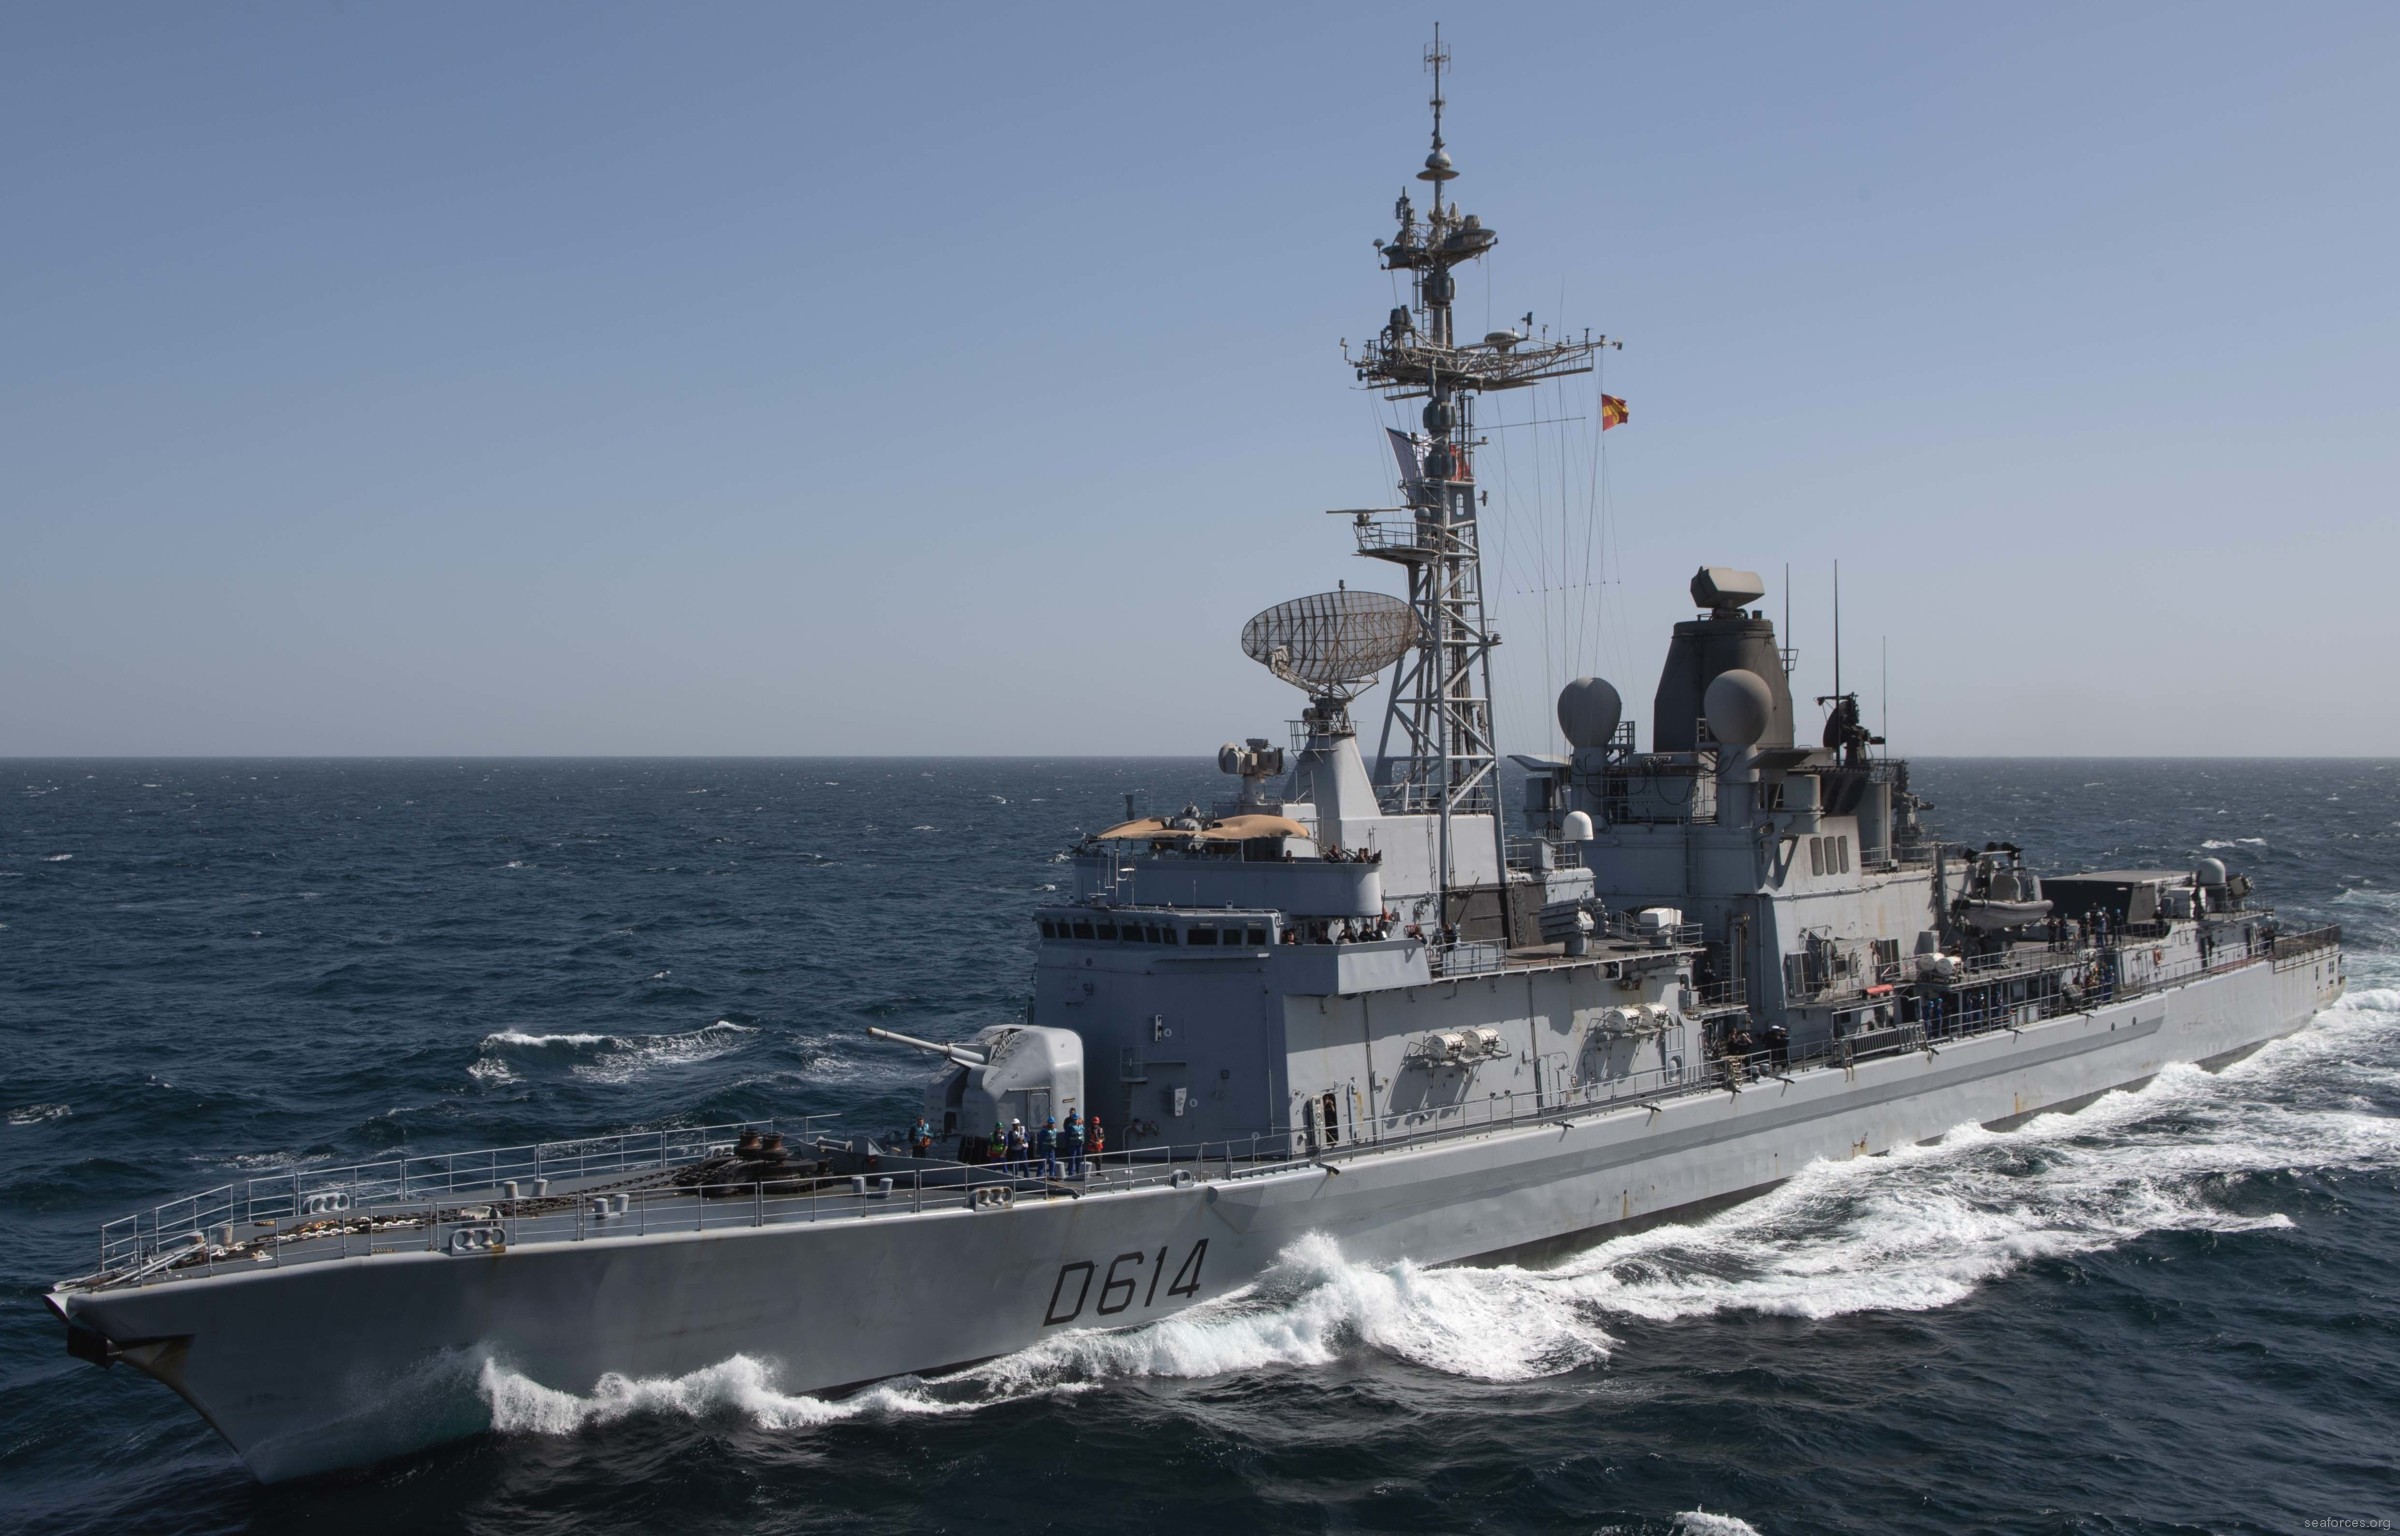 d-614 fs cassard f70aa class guided missile frigate ffgh ddg french navy marine nationale 21